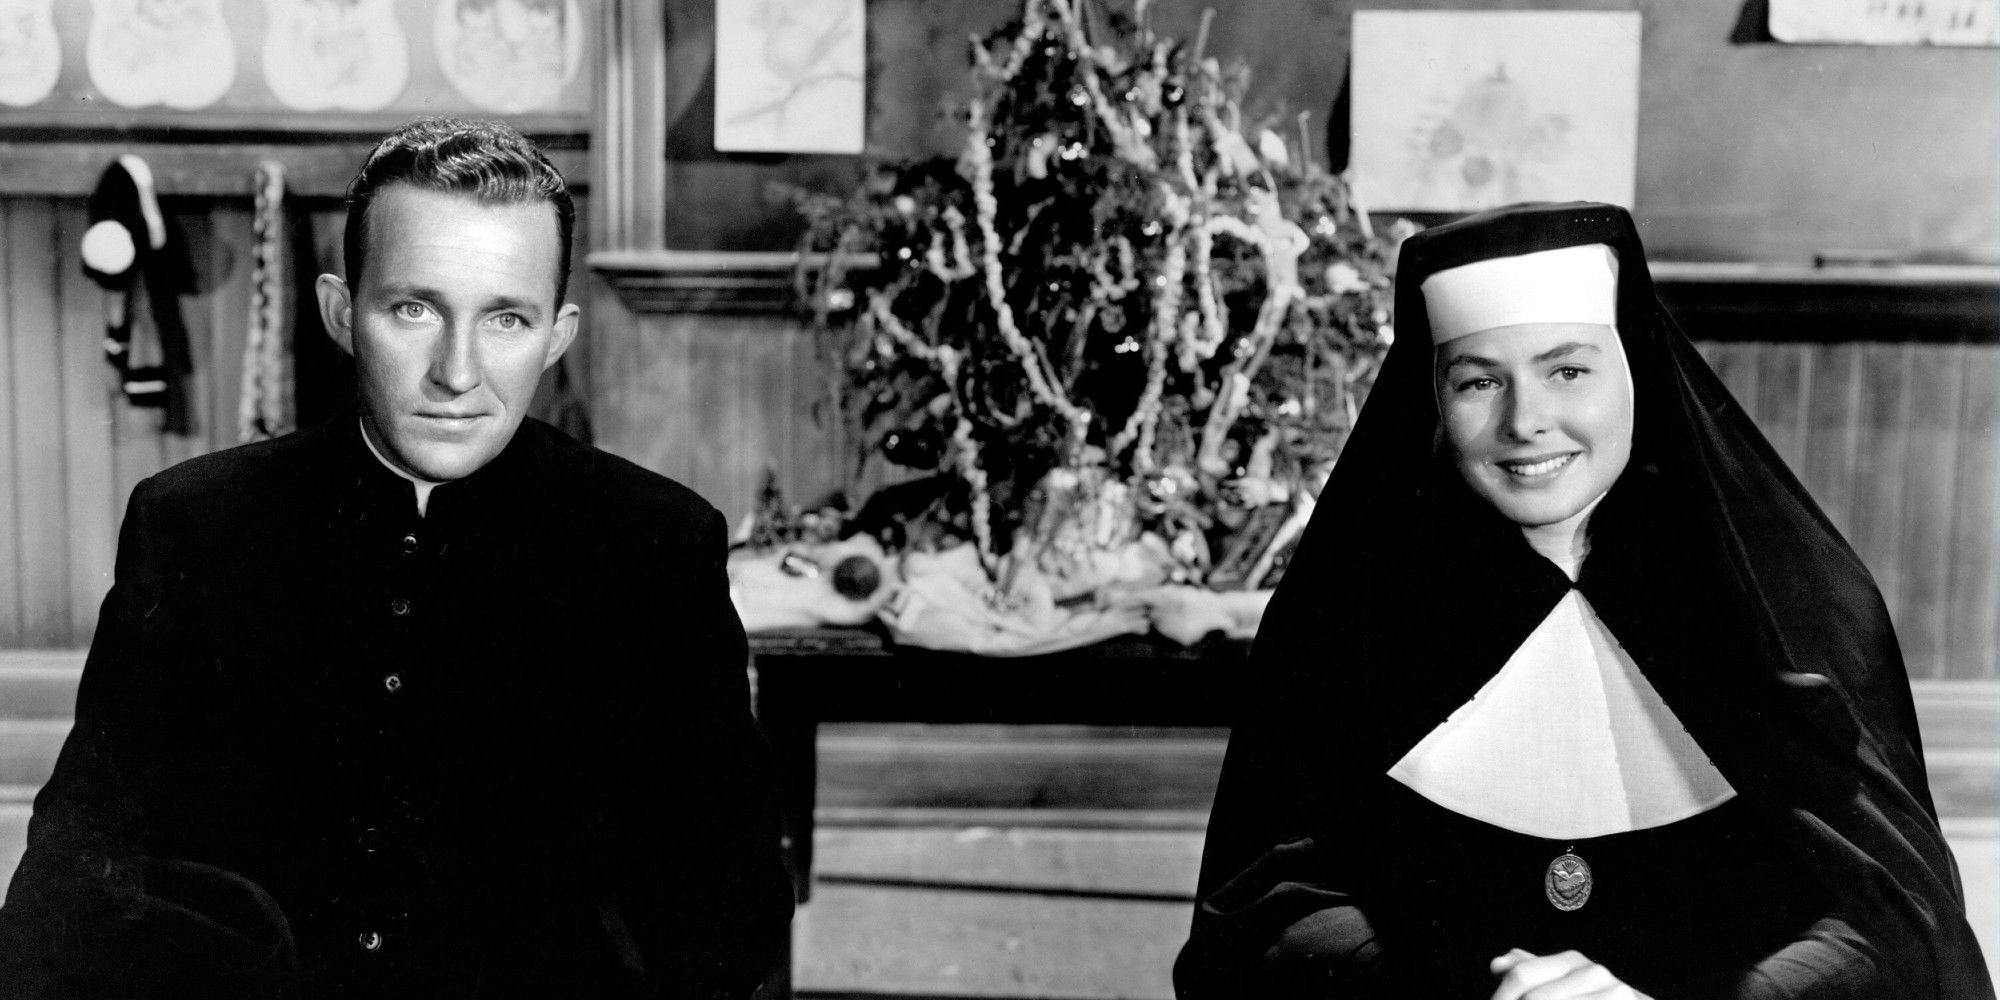 Father O'Malley in front of a Christmas Tree in The Bells of St Marys The Bells of St. Mary (1945) Ingrid Bergman as Sister Mary Benedict